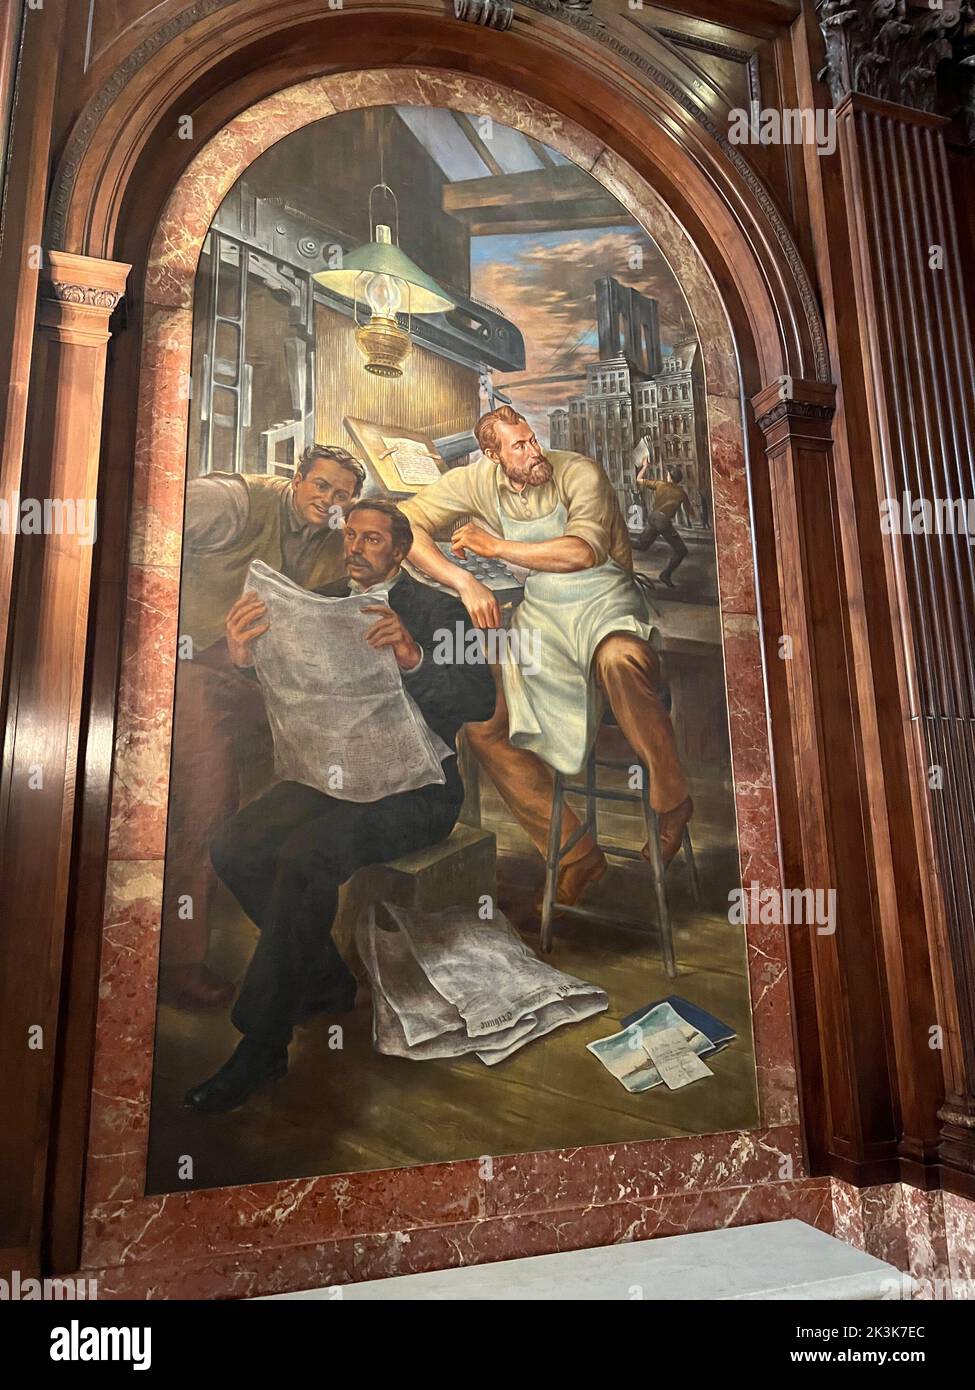 'THE LINOTYPE- MERGENTHAIER AND WHITELAW REID' The McGraw Rotunda of the 5th Ave. New York Public Library building contains a set of WPA murals: 'It features The Story of the Recorded Word, a set of four large arched panels by Edward Laning, 1938-1942. Stock Photo